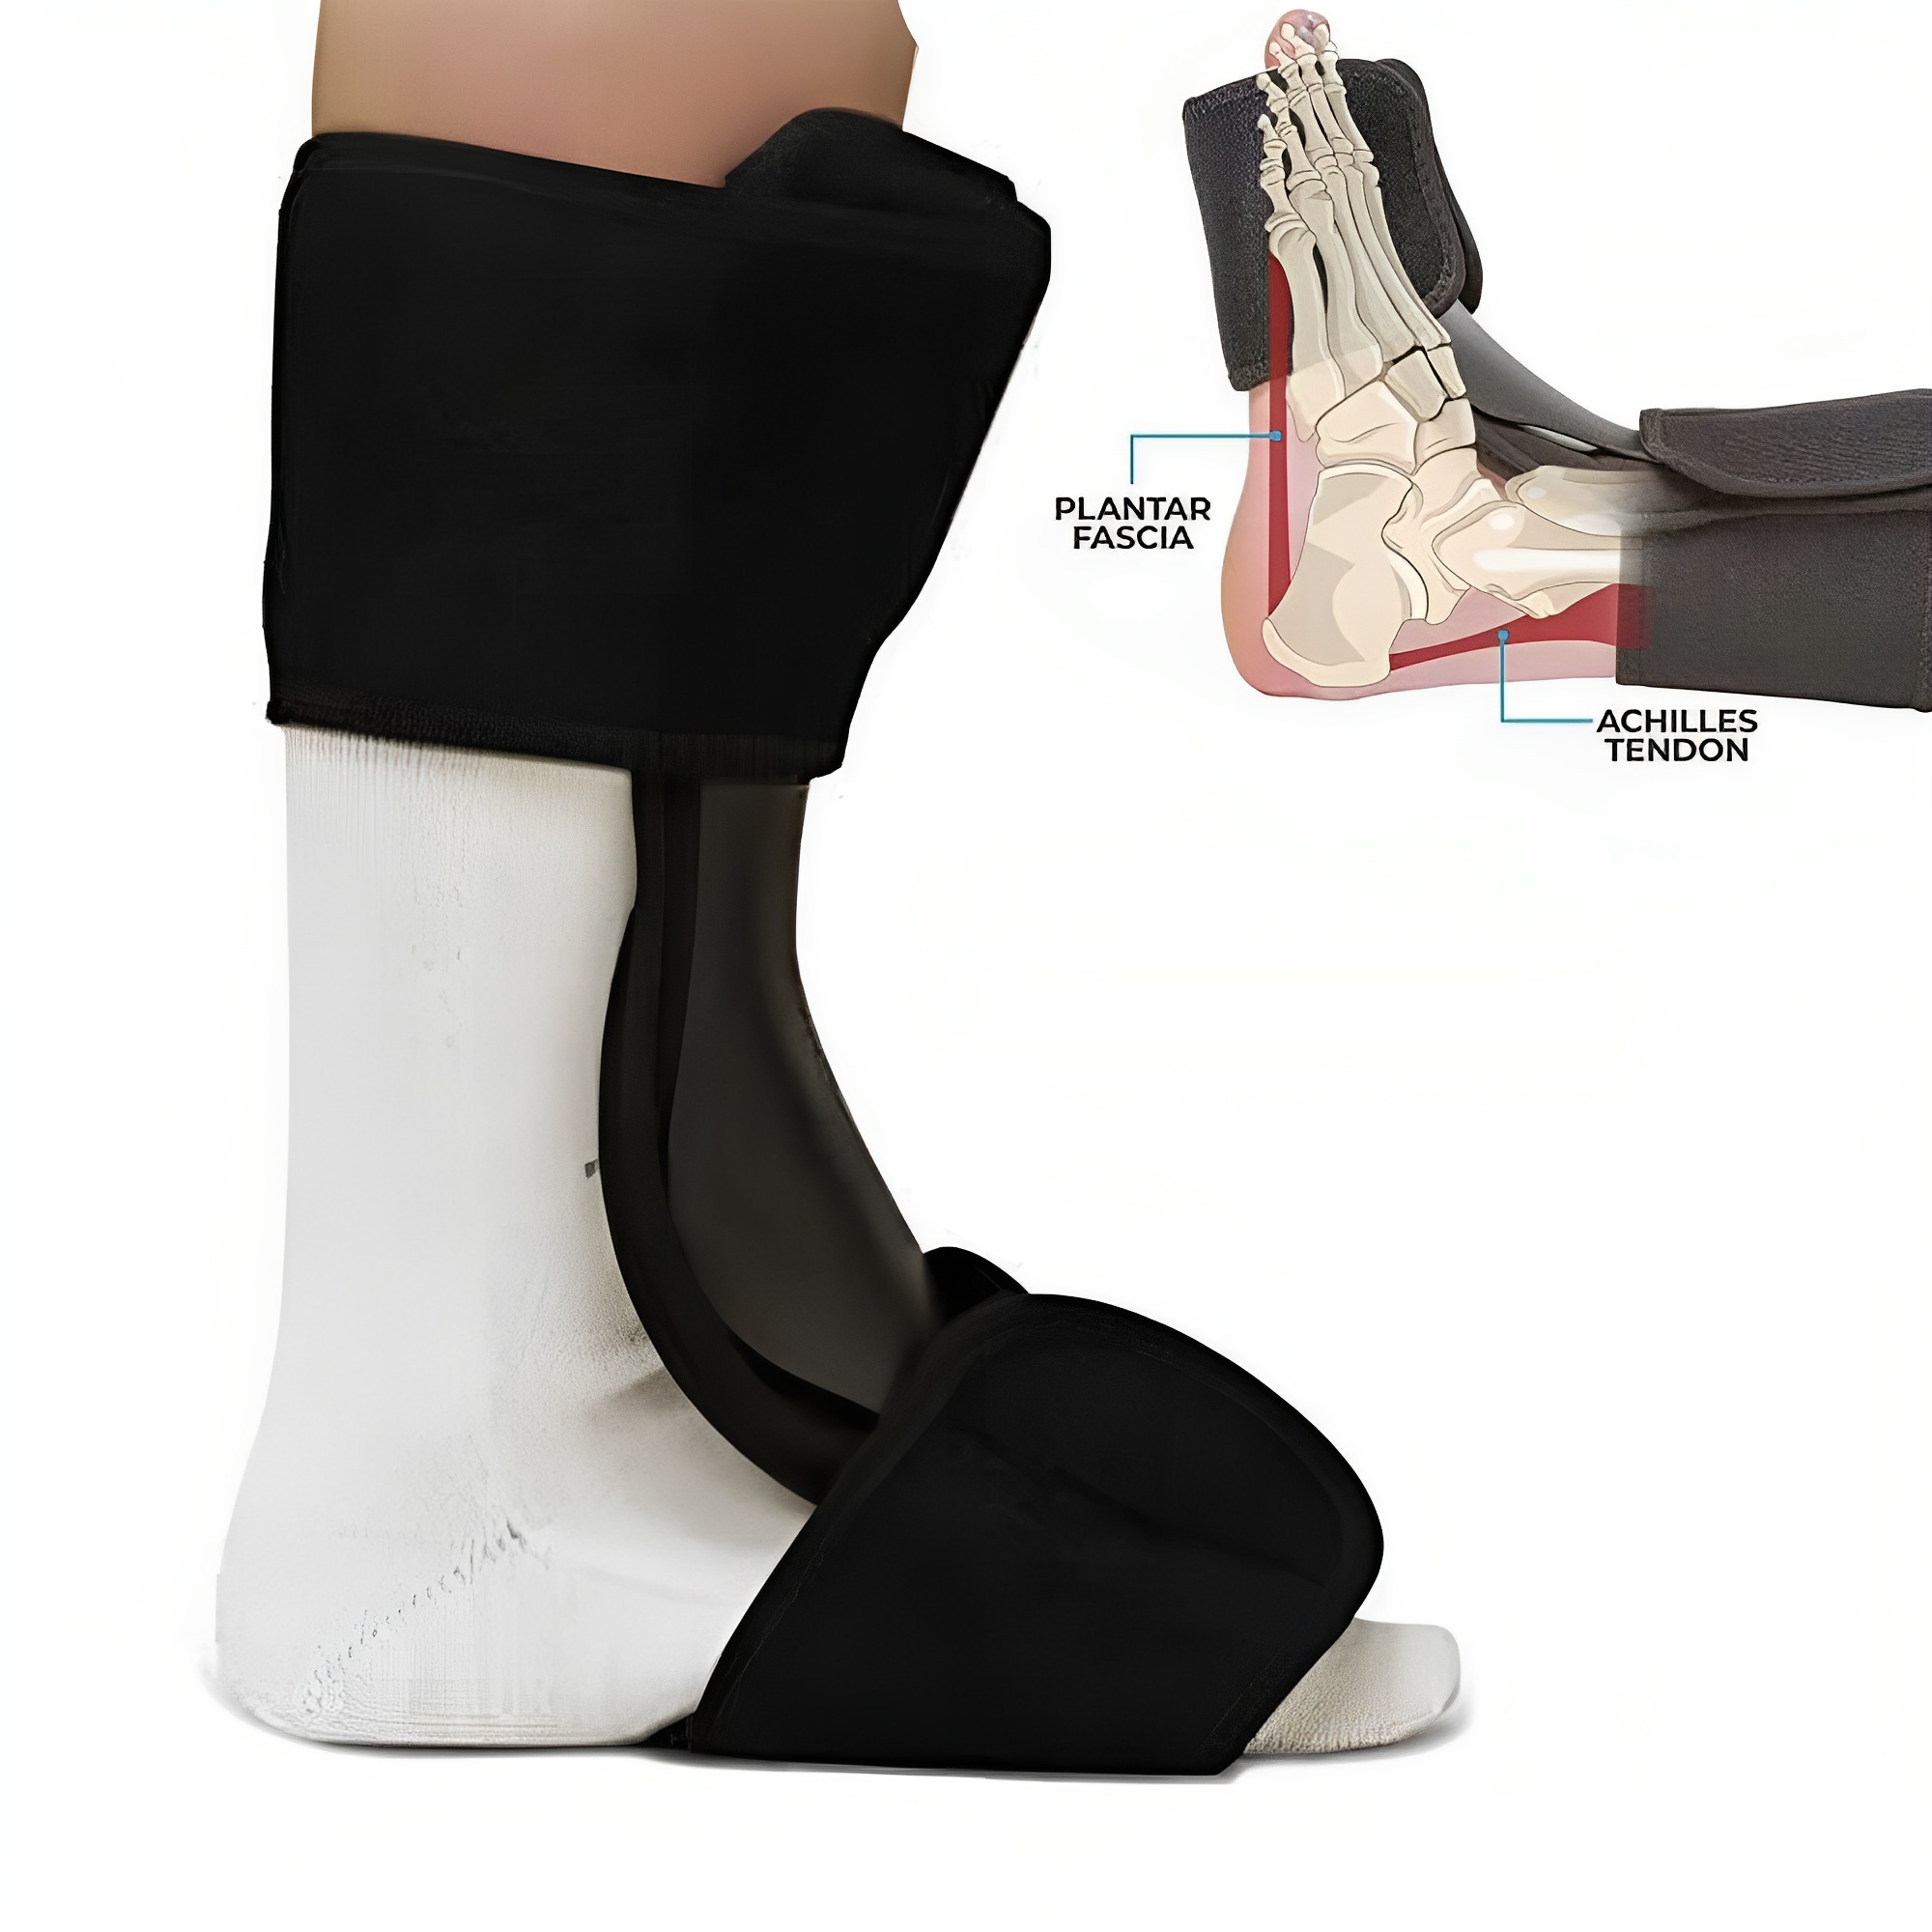 Night Splints help with the treatment of plantar fasciitis and Achilles  tendonitis.